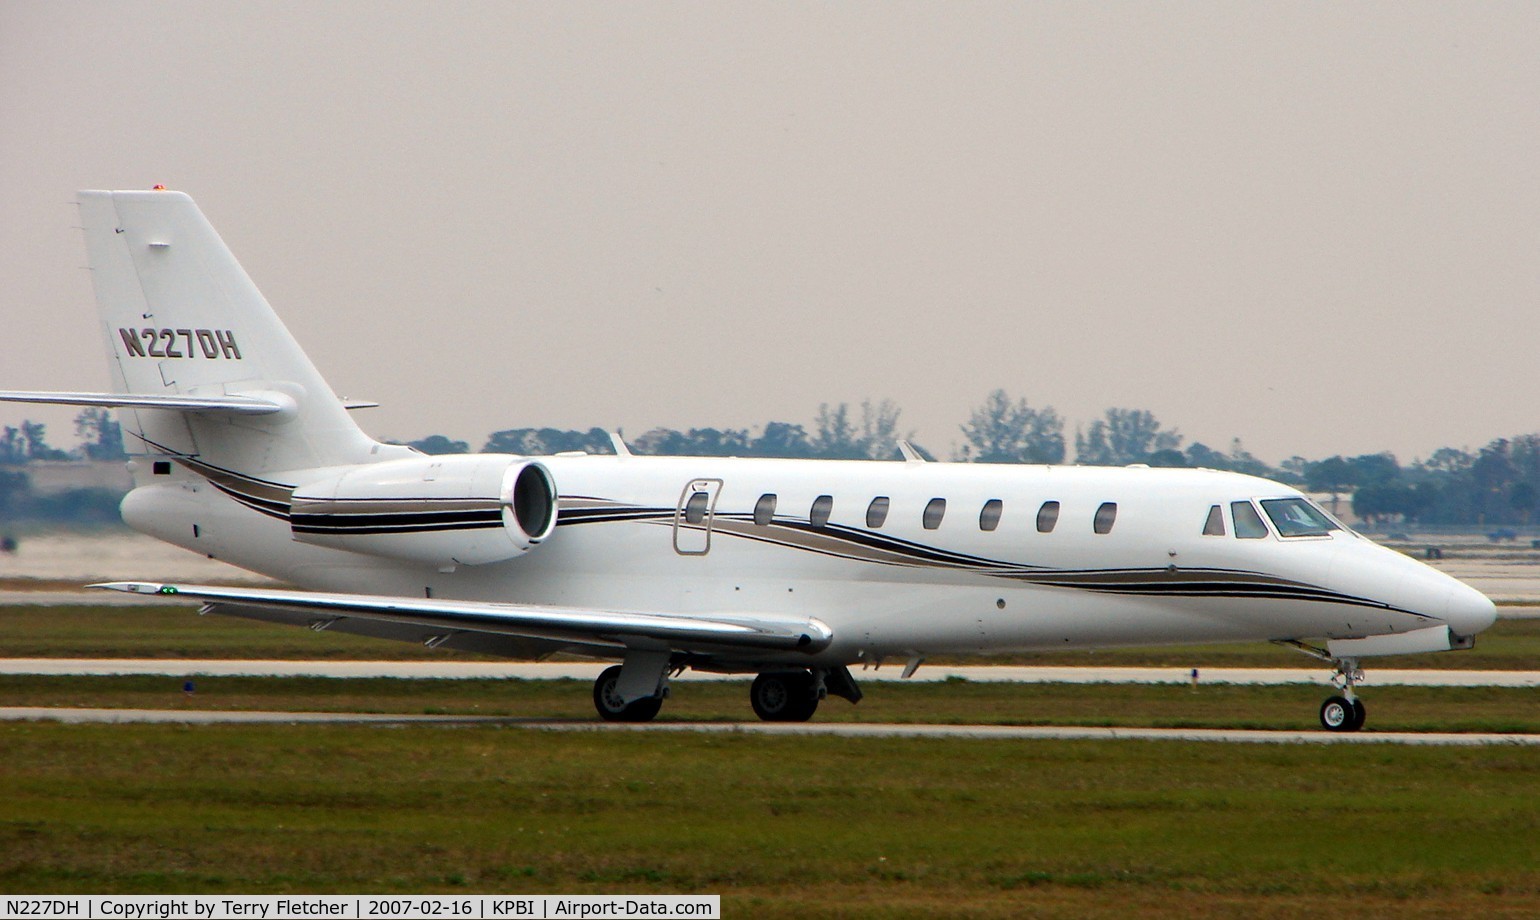 N227DH, 2006 Cessna 680 Citation Sovereign C/N 680-0086, part of the Friday afternoon arrivals 'rush' at PBI